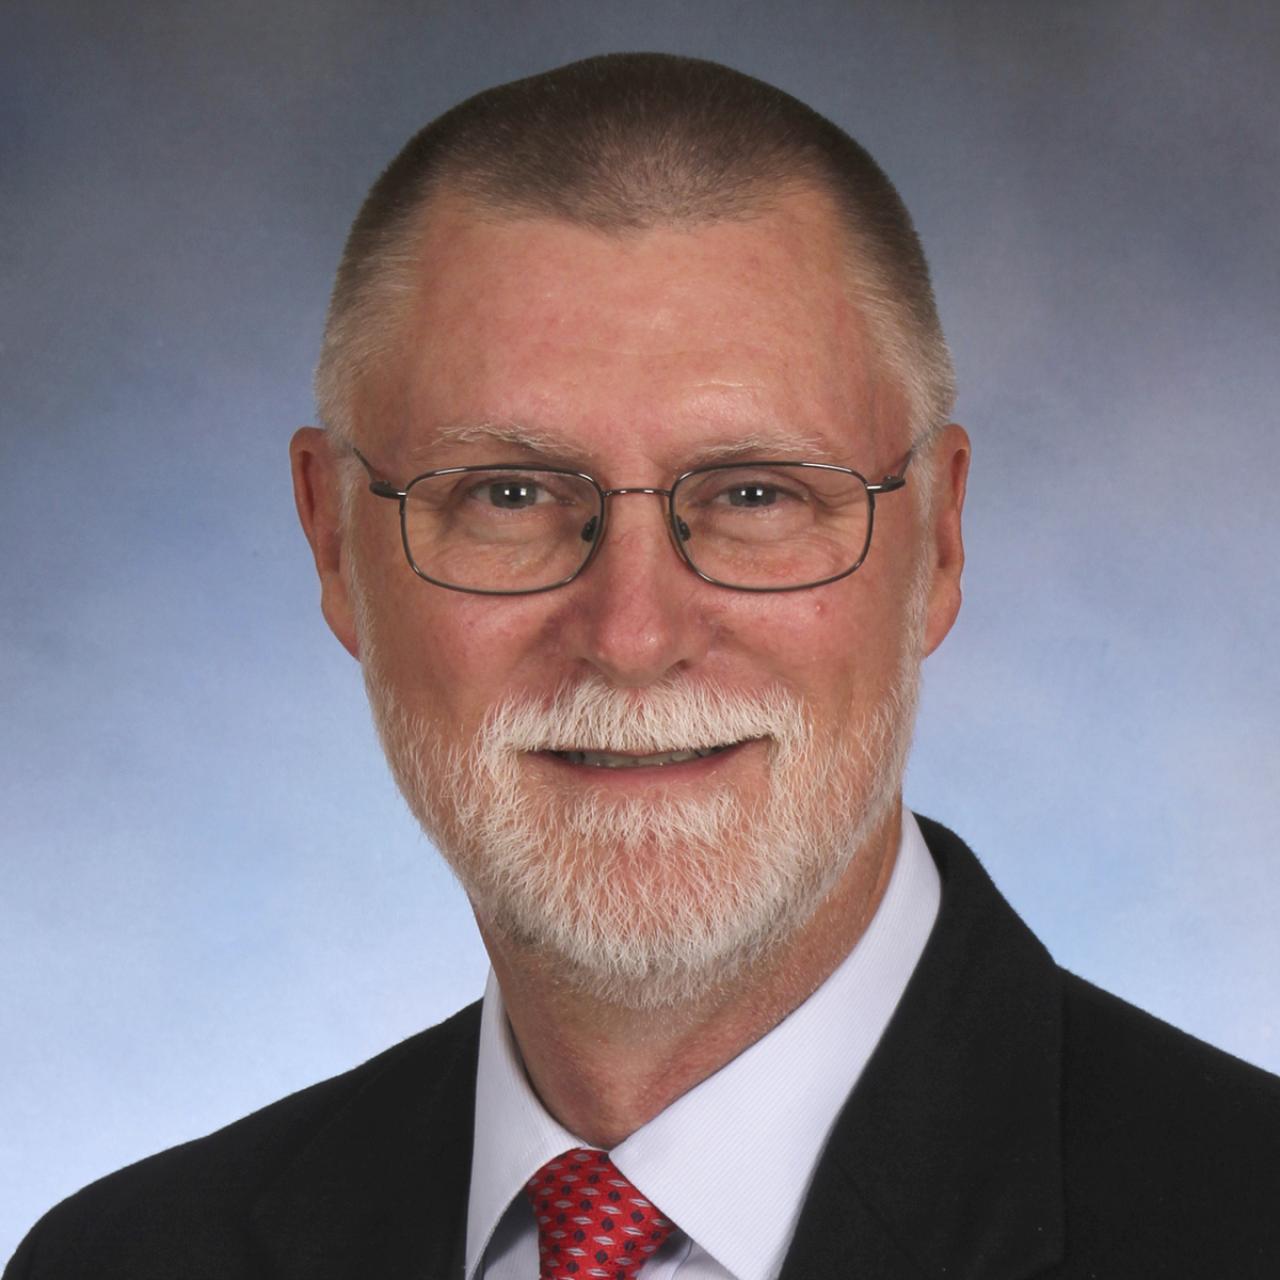 Images of Bruce A. McPheron, Executive Vice President and Provost, The Ohio State University